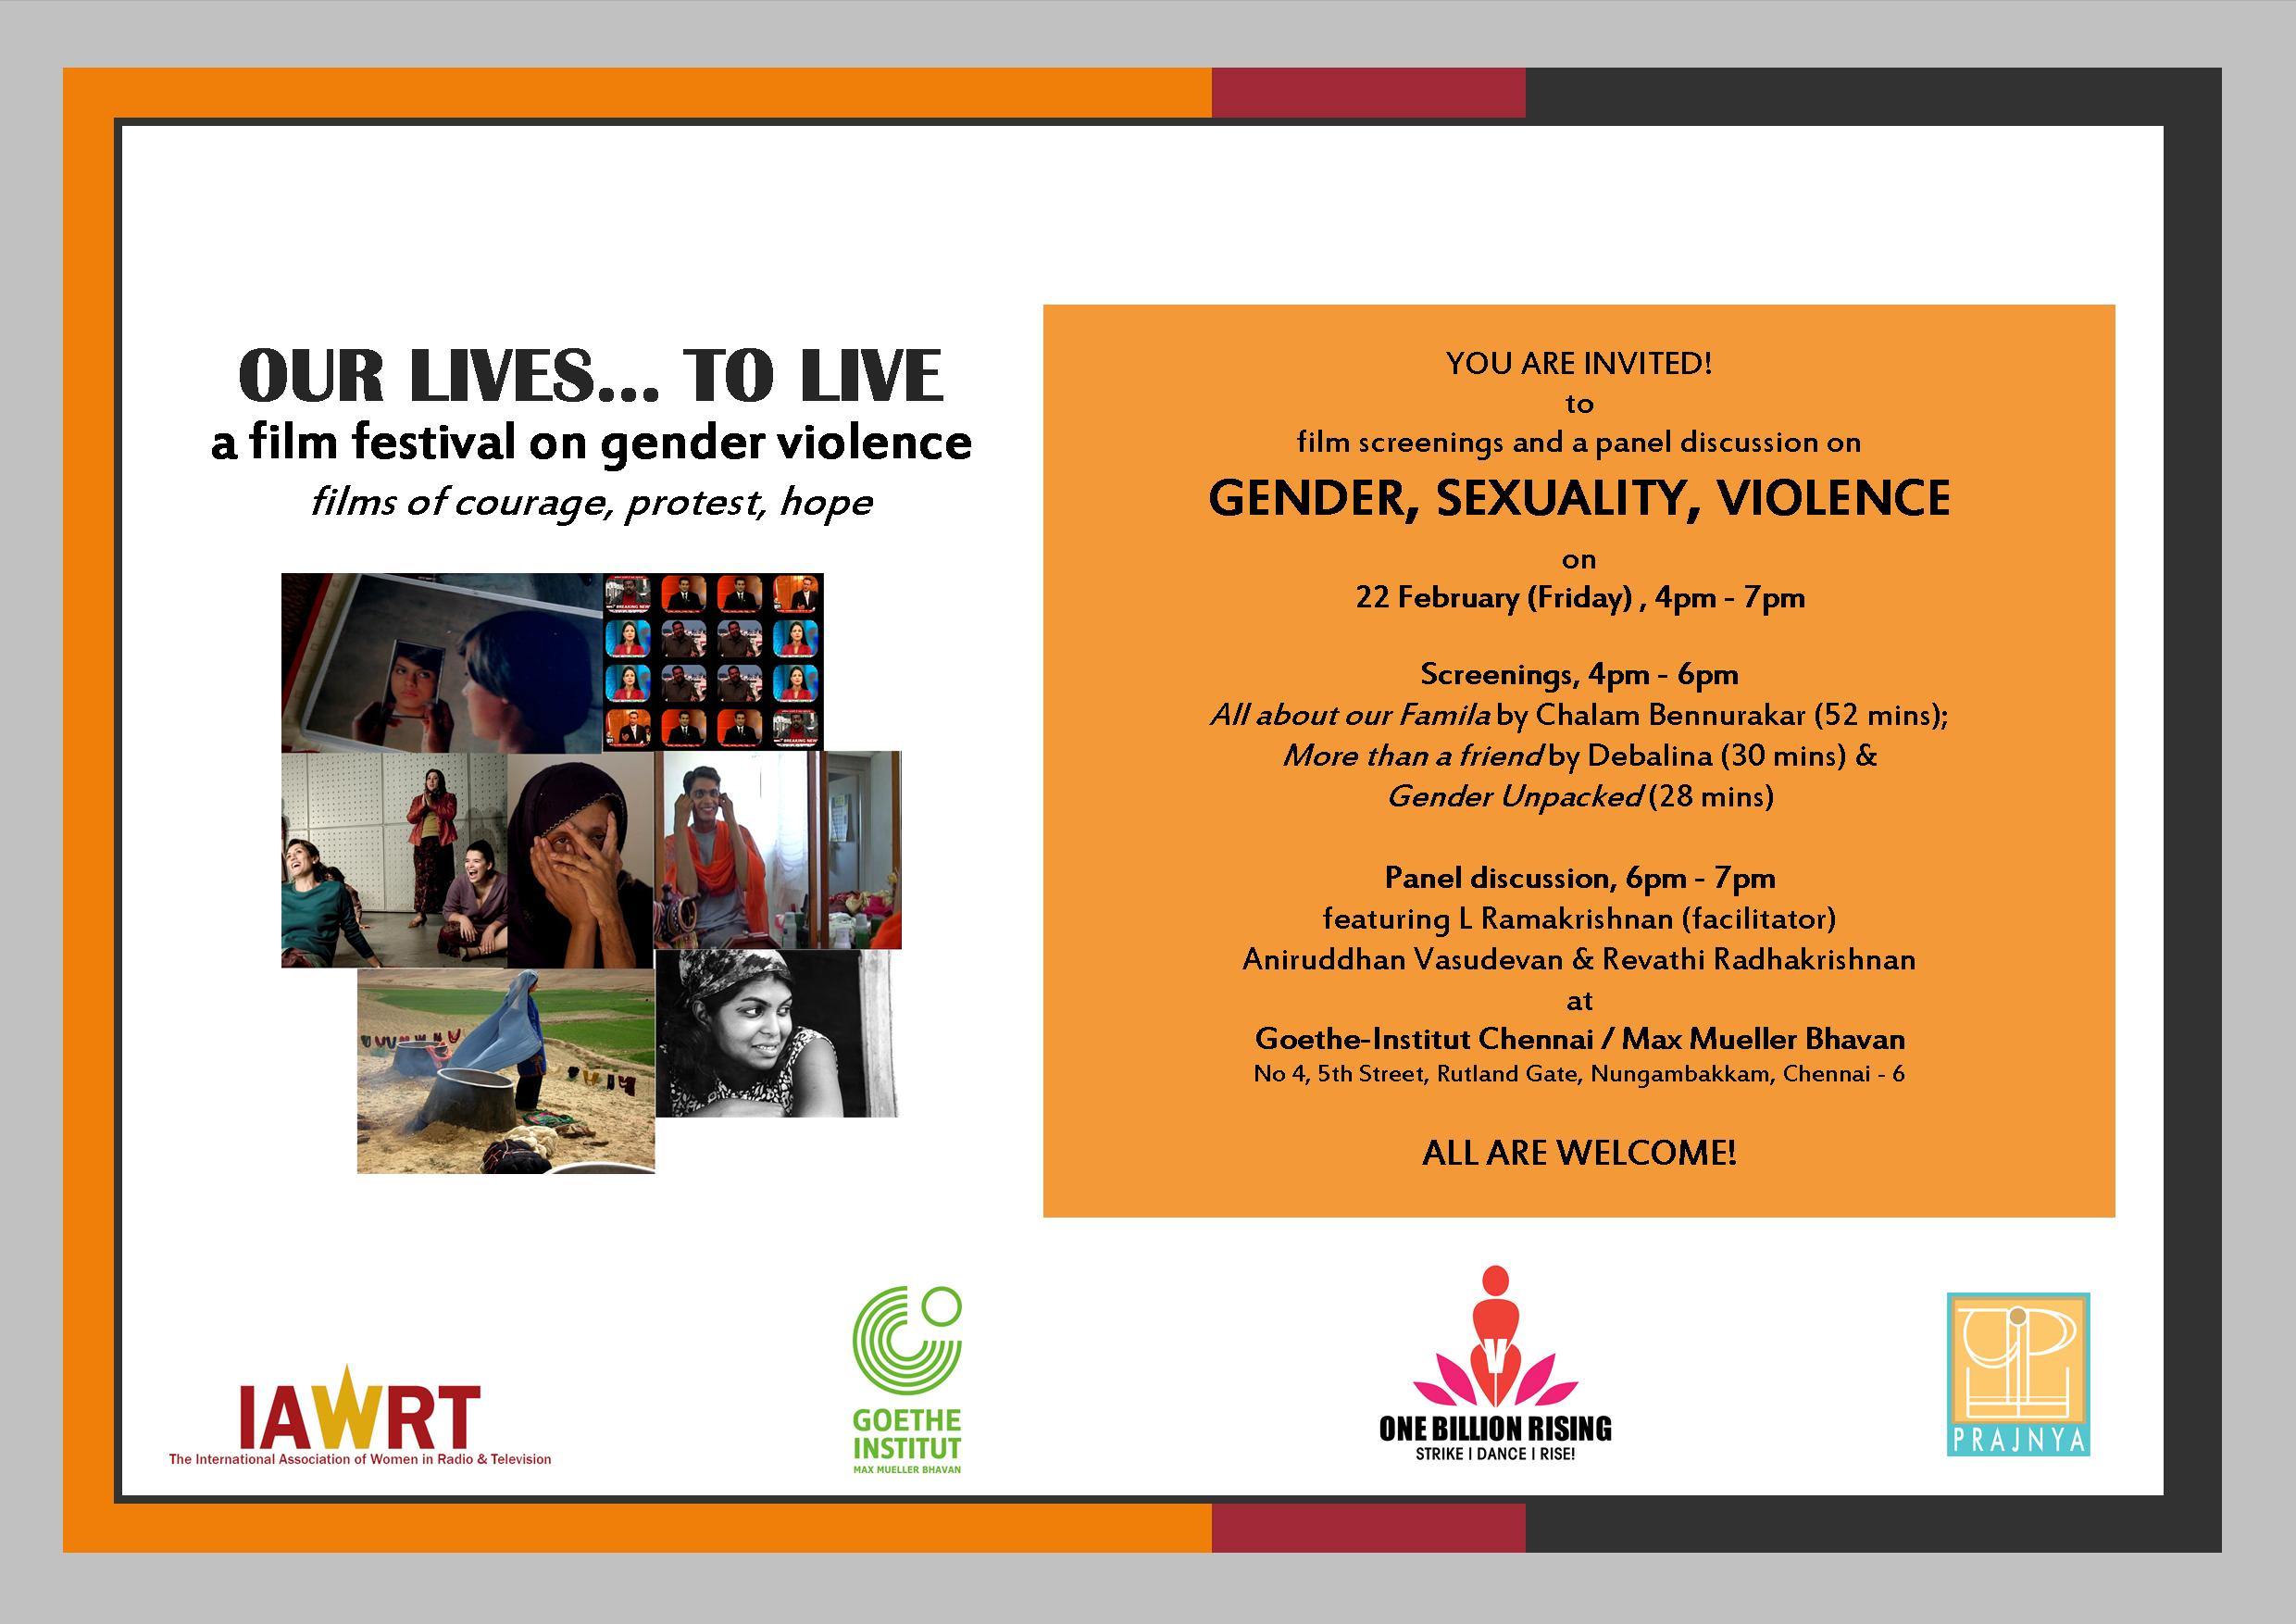 Gender-Sexuality-Violence: panel discussion in Chennai, Feb 22, 2013